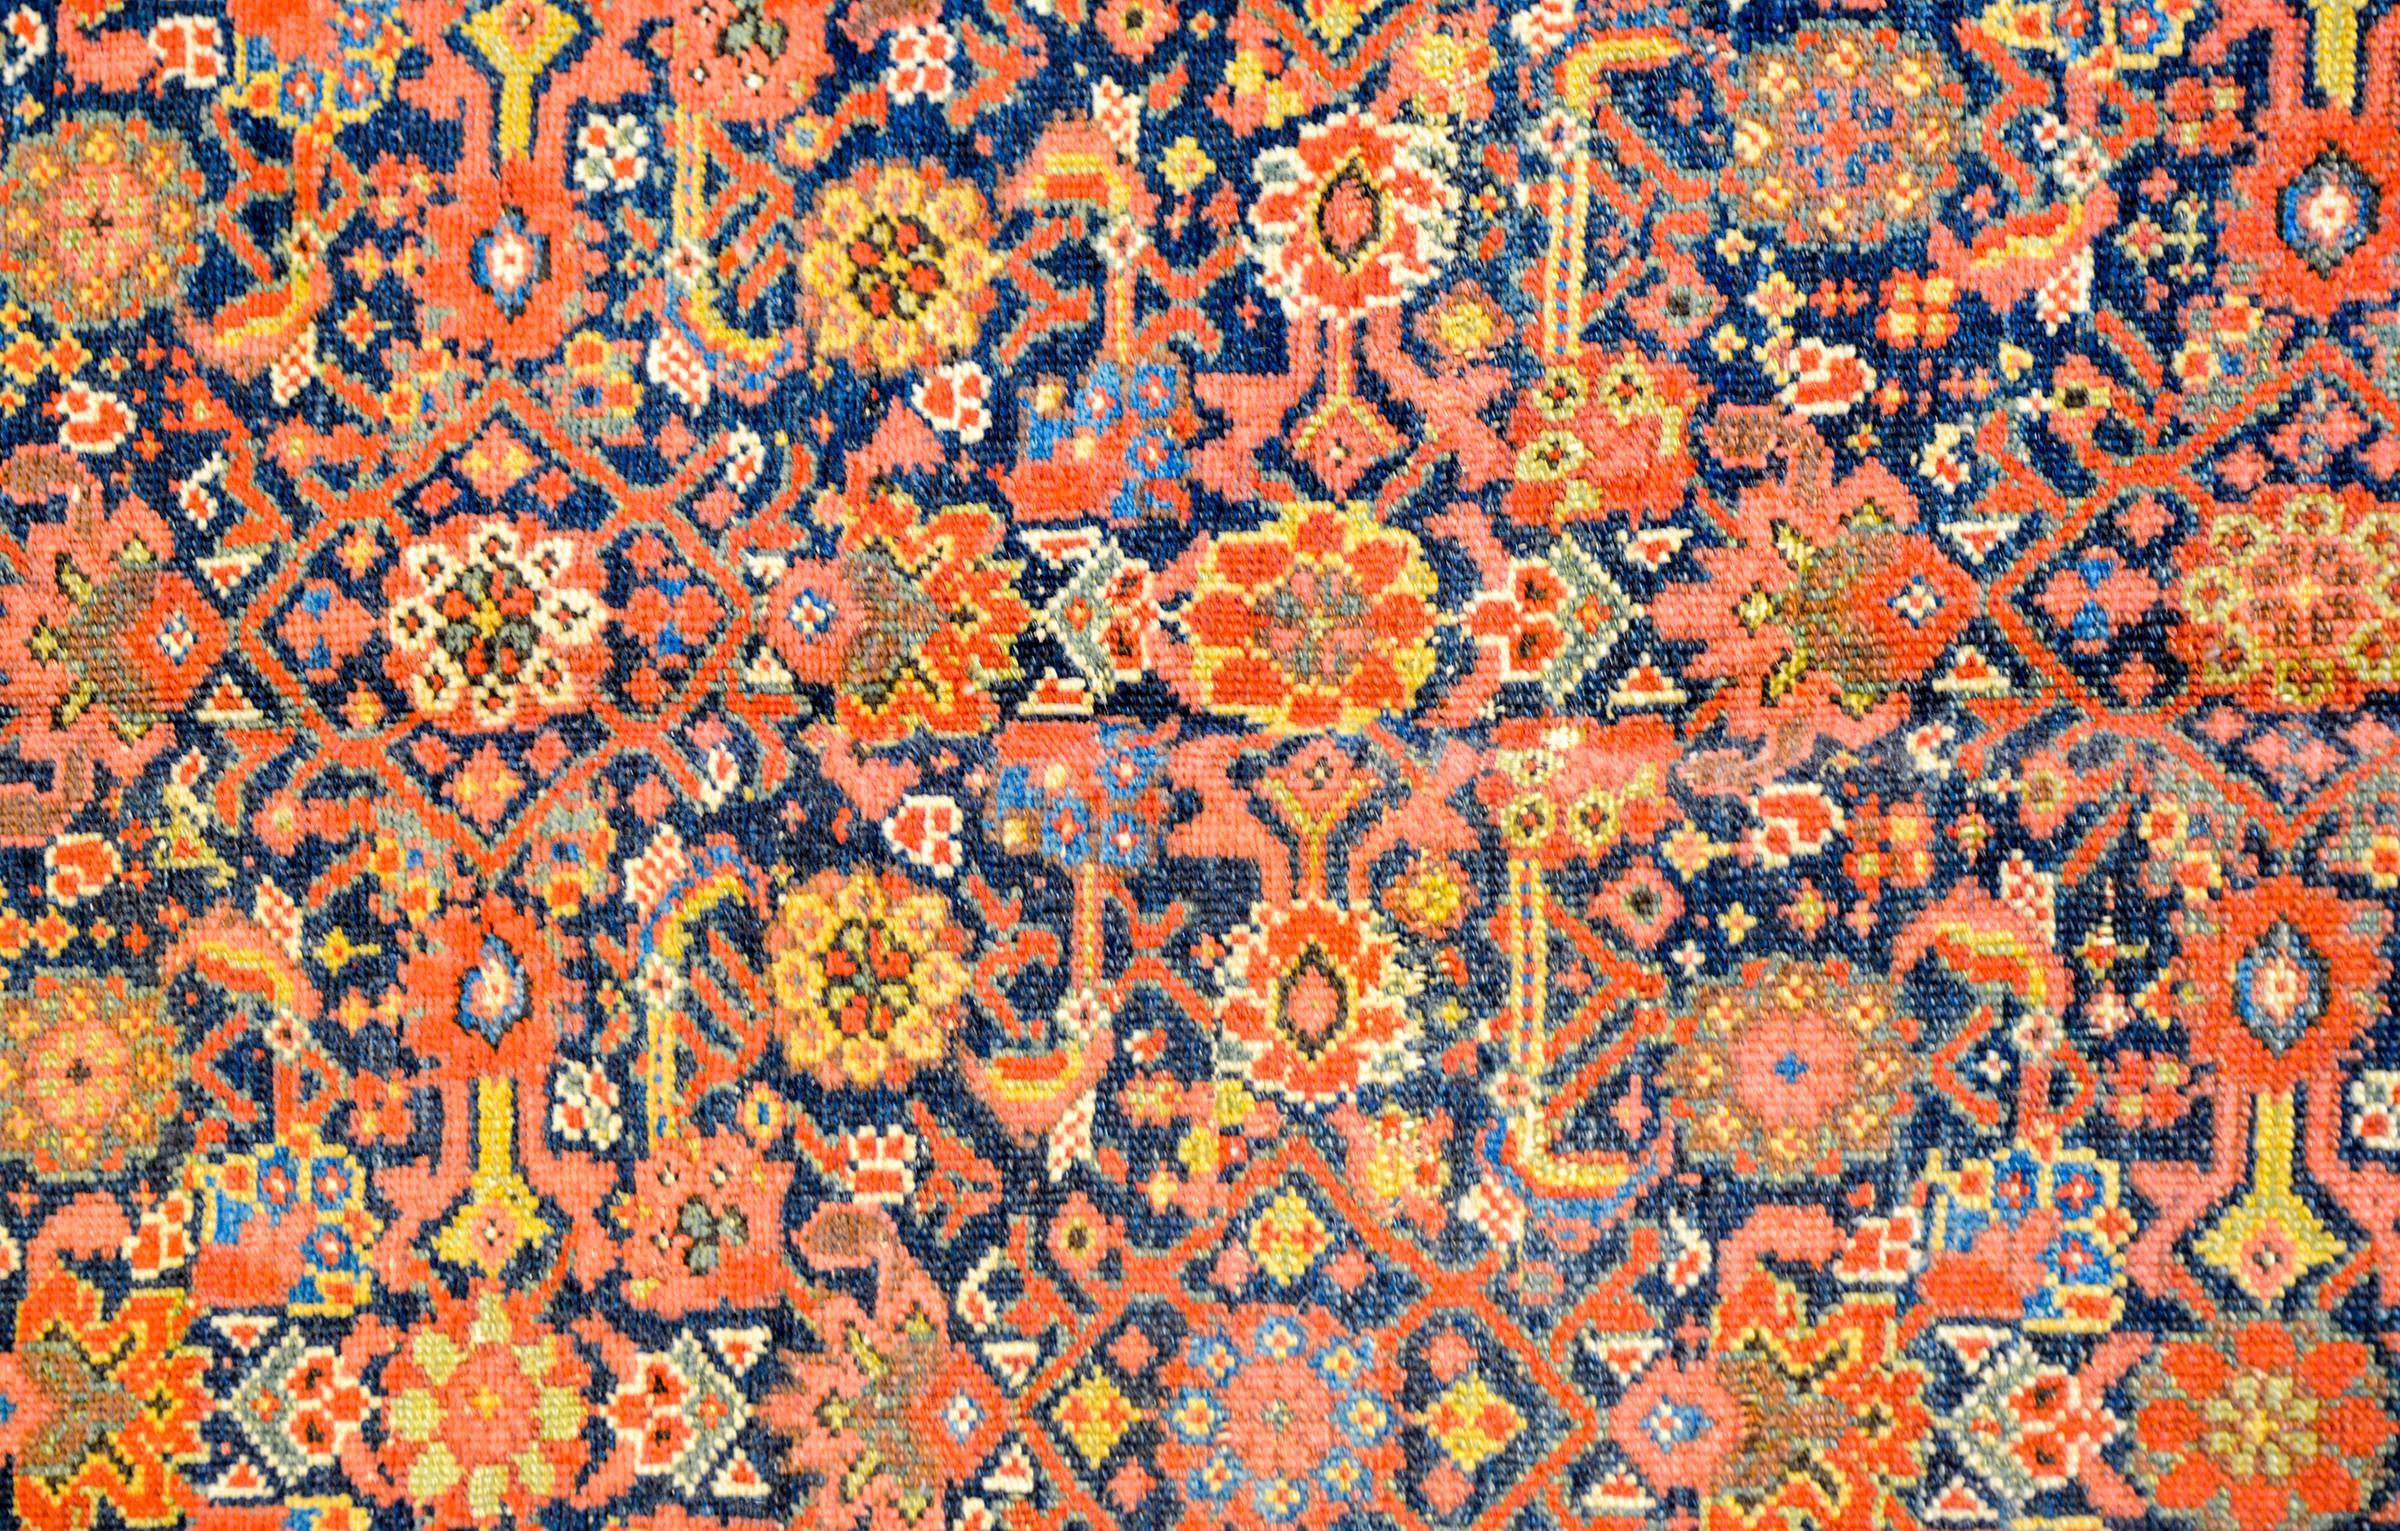 An exceptional early 20th century Persian Malayar Herati rug with an incredible pattern consisting of one of the most intensely woven all-over multicolored floral and vine trellis patterns we've ever seen, woven in crimson, indigo, gold and green,